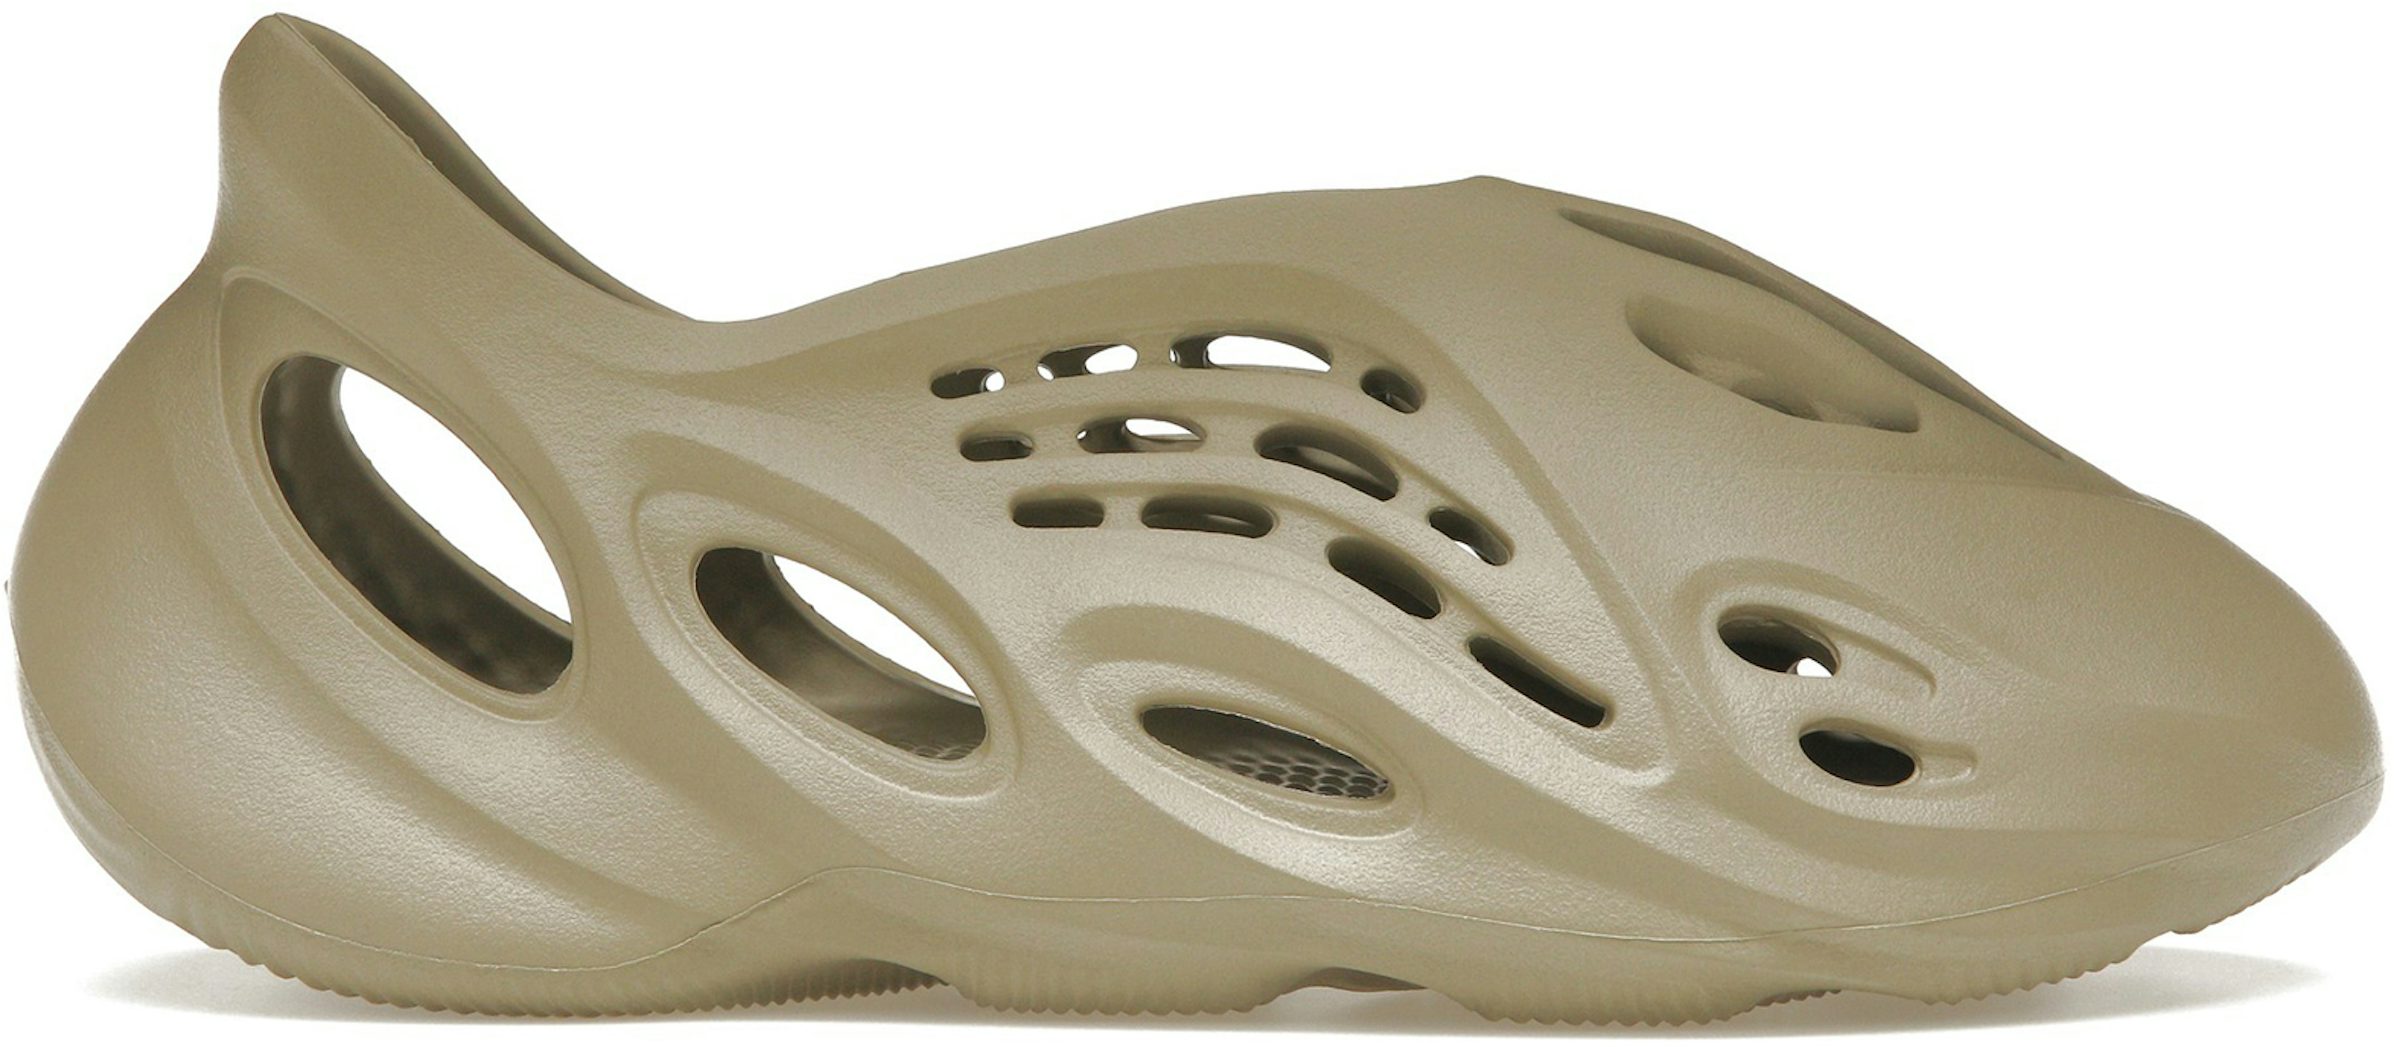 Release 2023] Kanye Look Away Louis Vuitton Just Launched Their Own Foam  Runners Clog